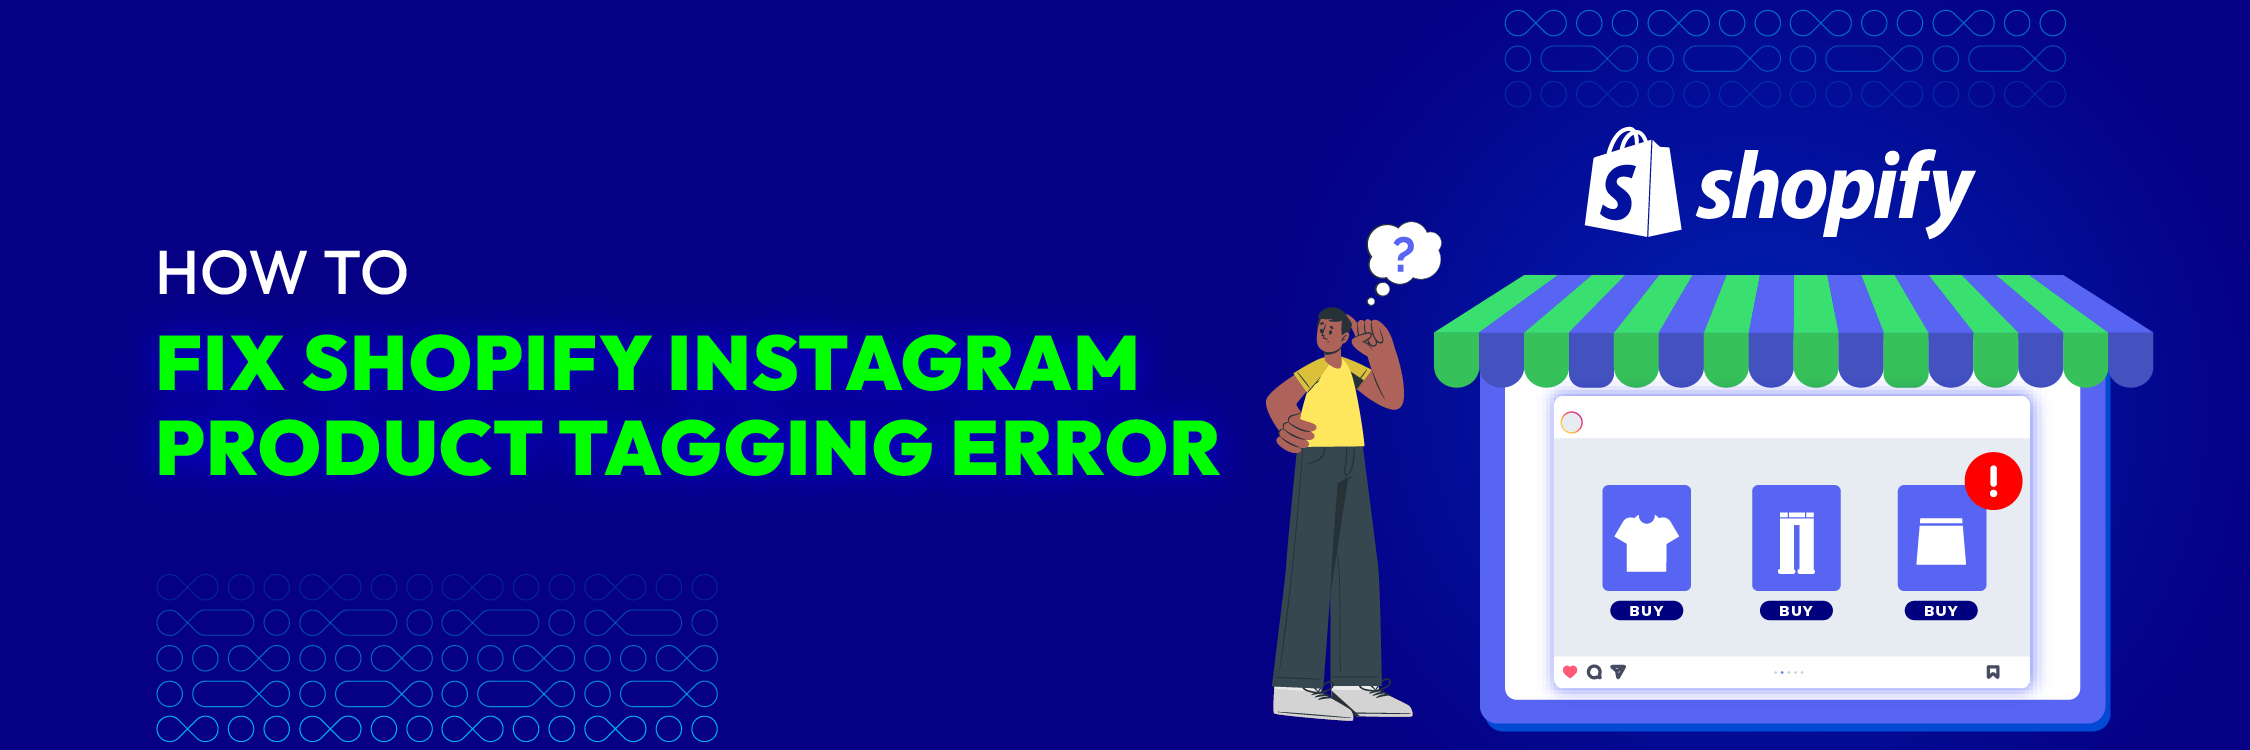 How to Fix Shopify Instagram Product Tagging Error